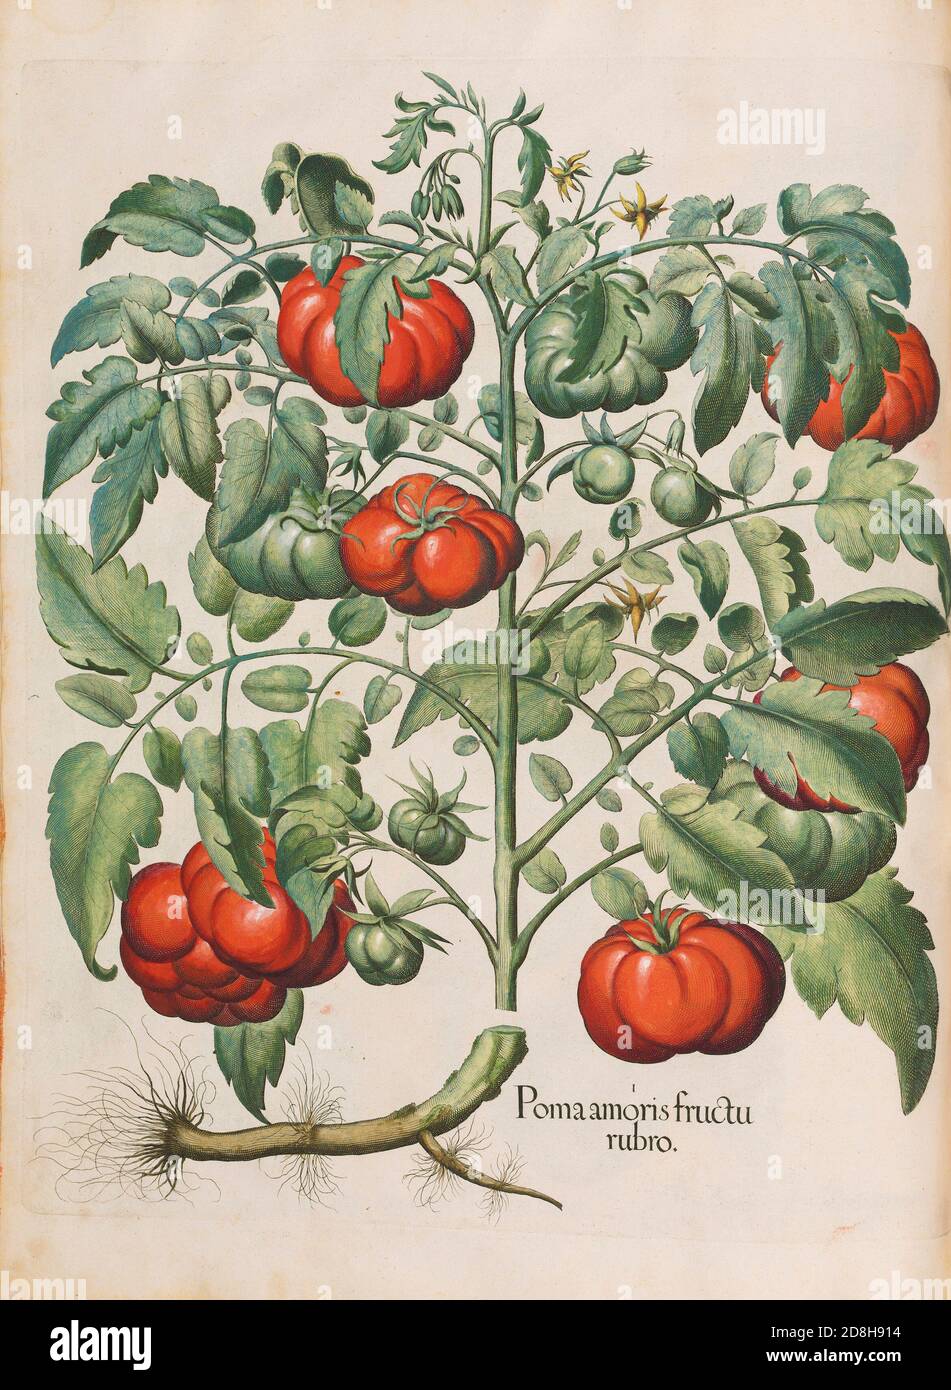 Tomatoes. Poma amoris fructu rubro, botanical illustration by Basil Besler from the The Hortus Eystettensis, produced by Basilius Besler in 1613. Stock Photo